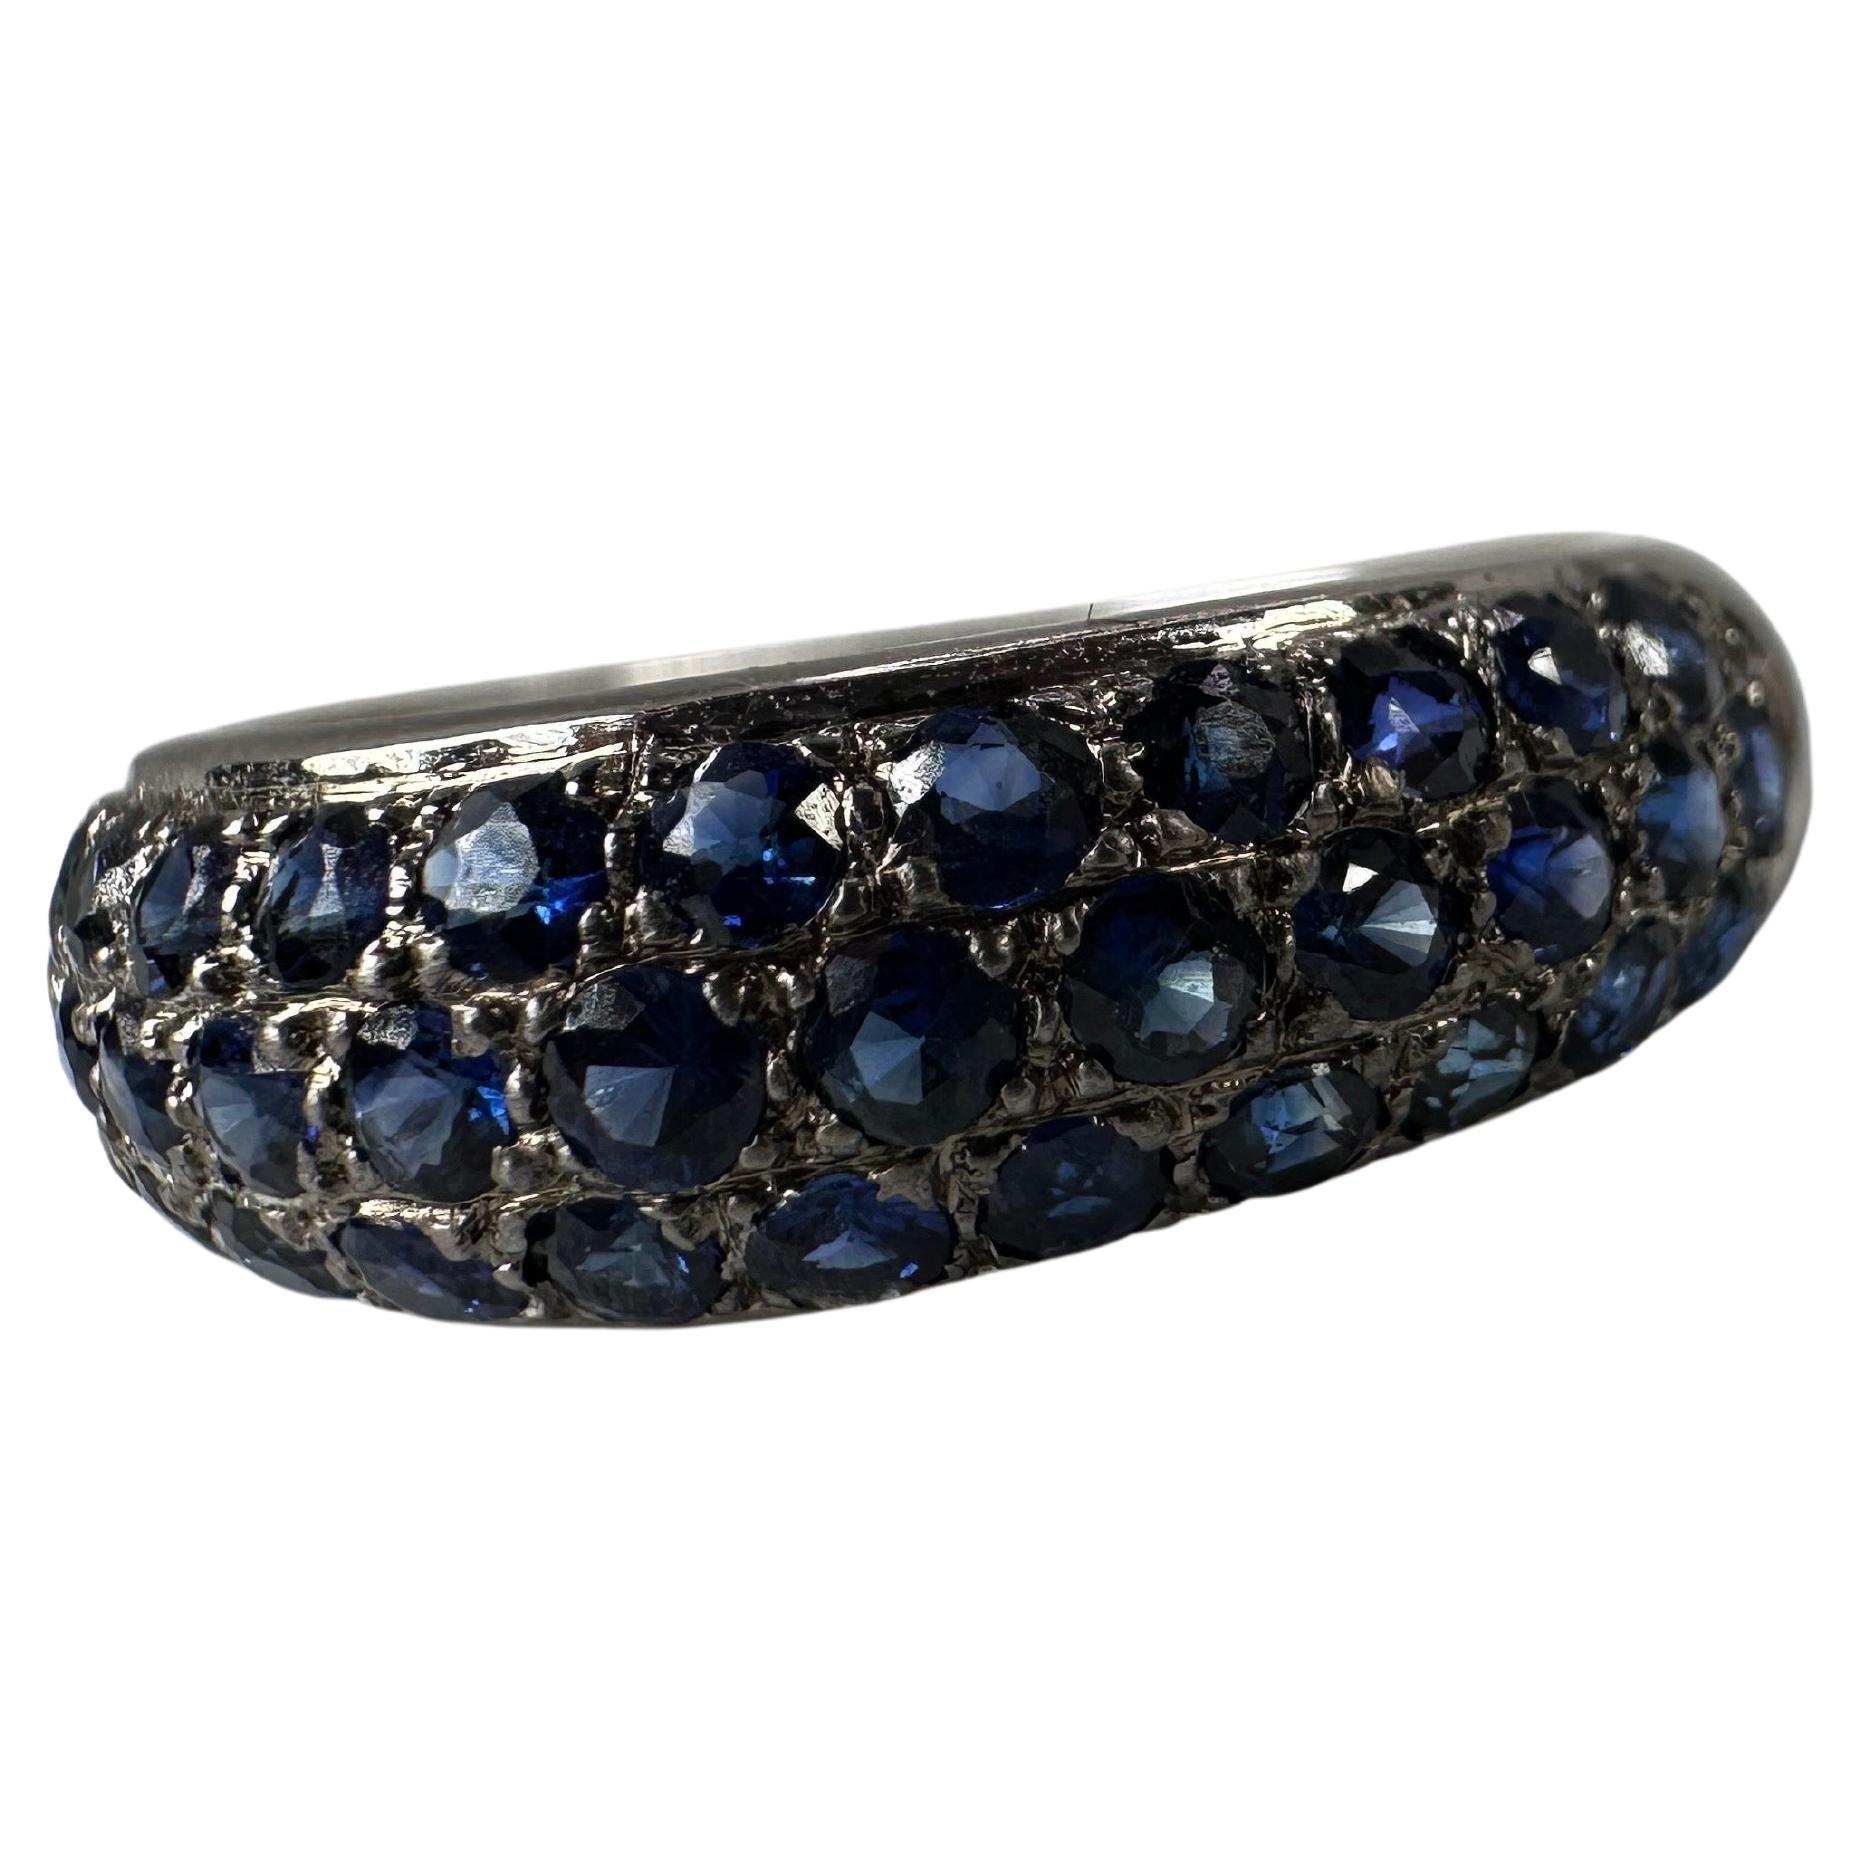 Well crafted pave set sapphire ring in 18KT white gold. Made with bright blue sapphires and minimalistic look.

GOLD: 18KT gold
NATURAL SAPPHIRE(S)
Clarity/Color: Slightly Included/Blue
Grams:4.17
size: 6.5
Item#: 200-00045 RTF

WHAT YOU GET AT